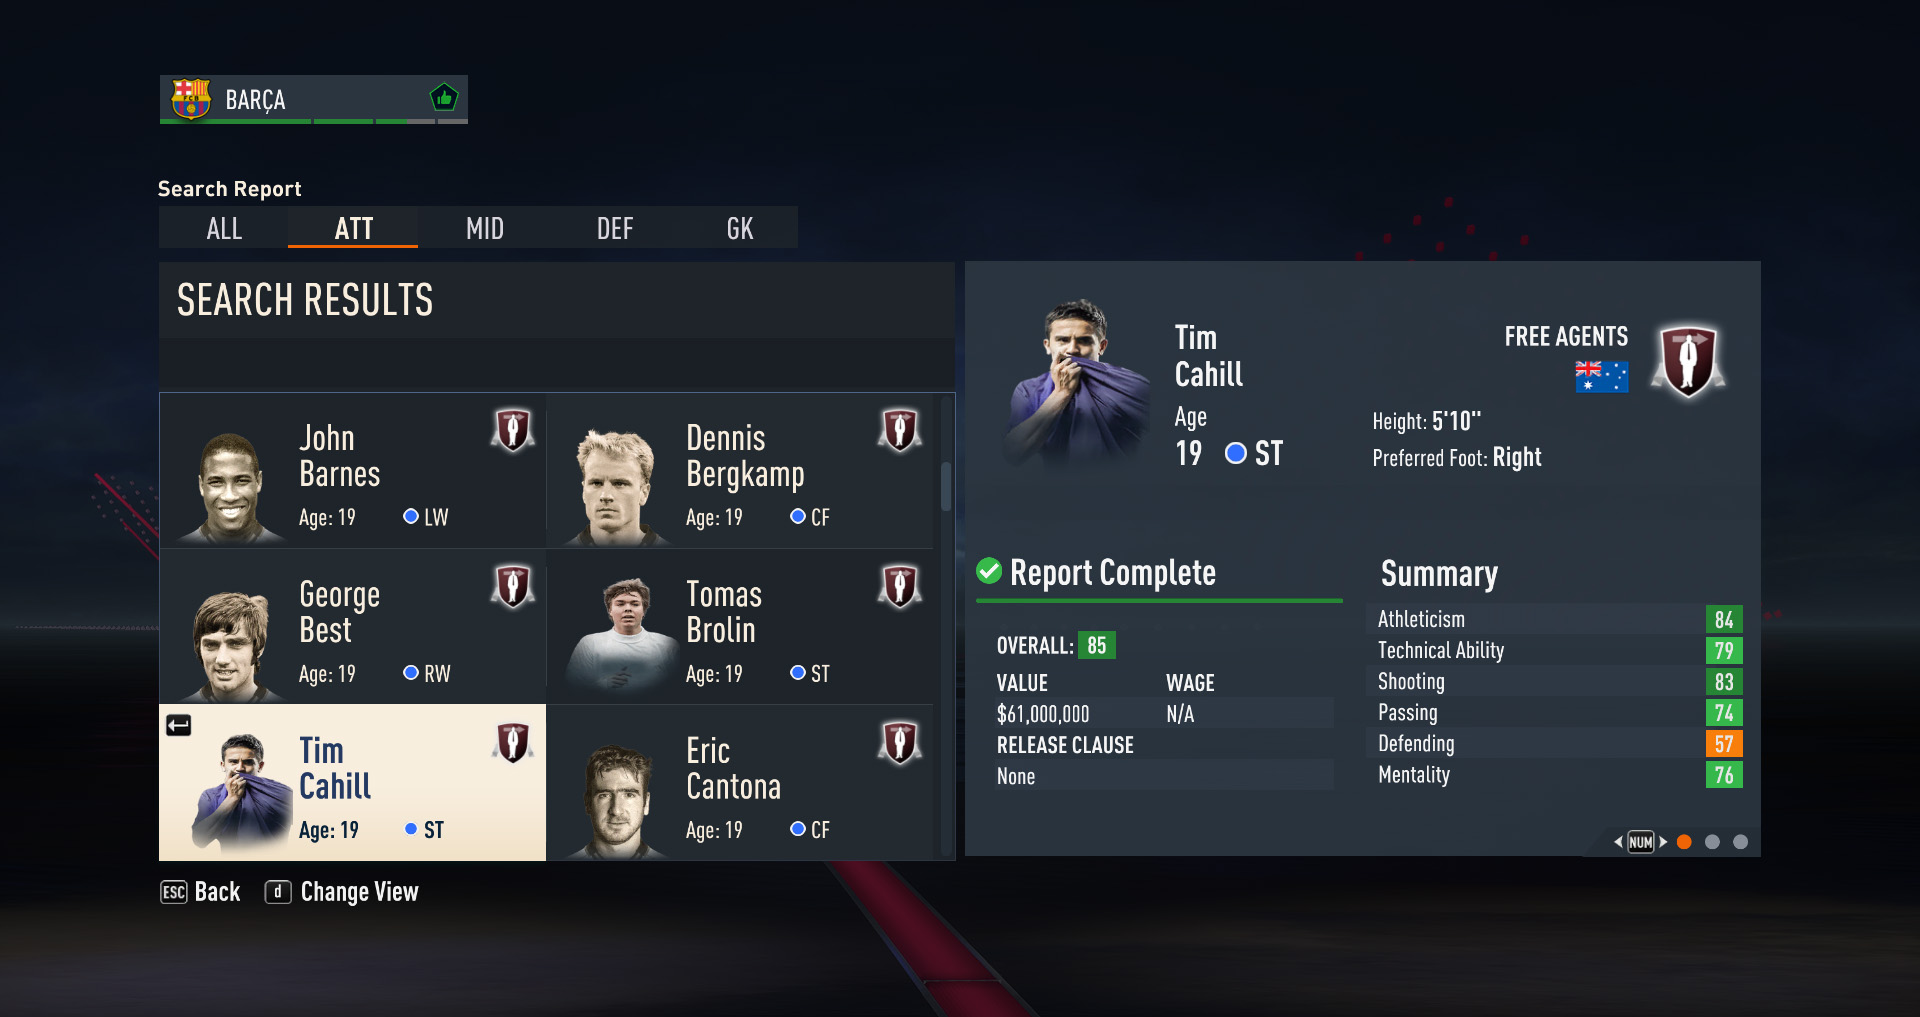 FIFA 23 Icons: Full List of Players